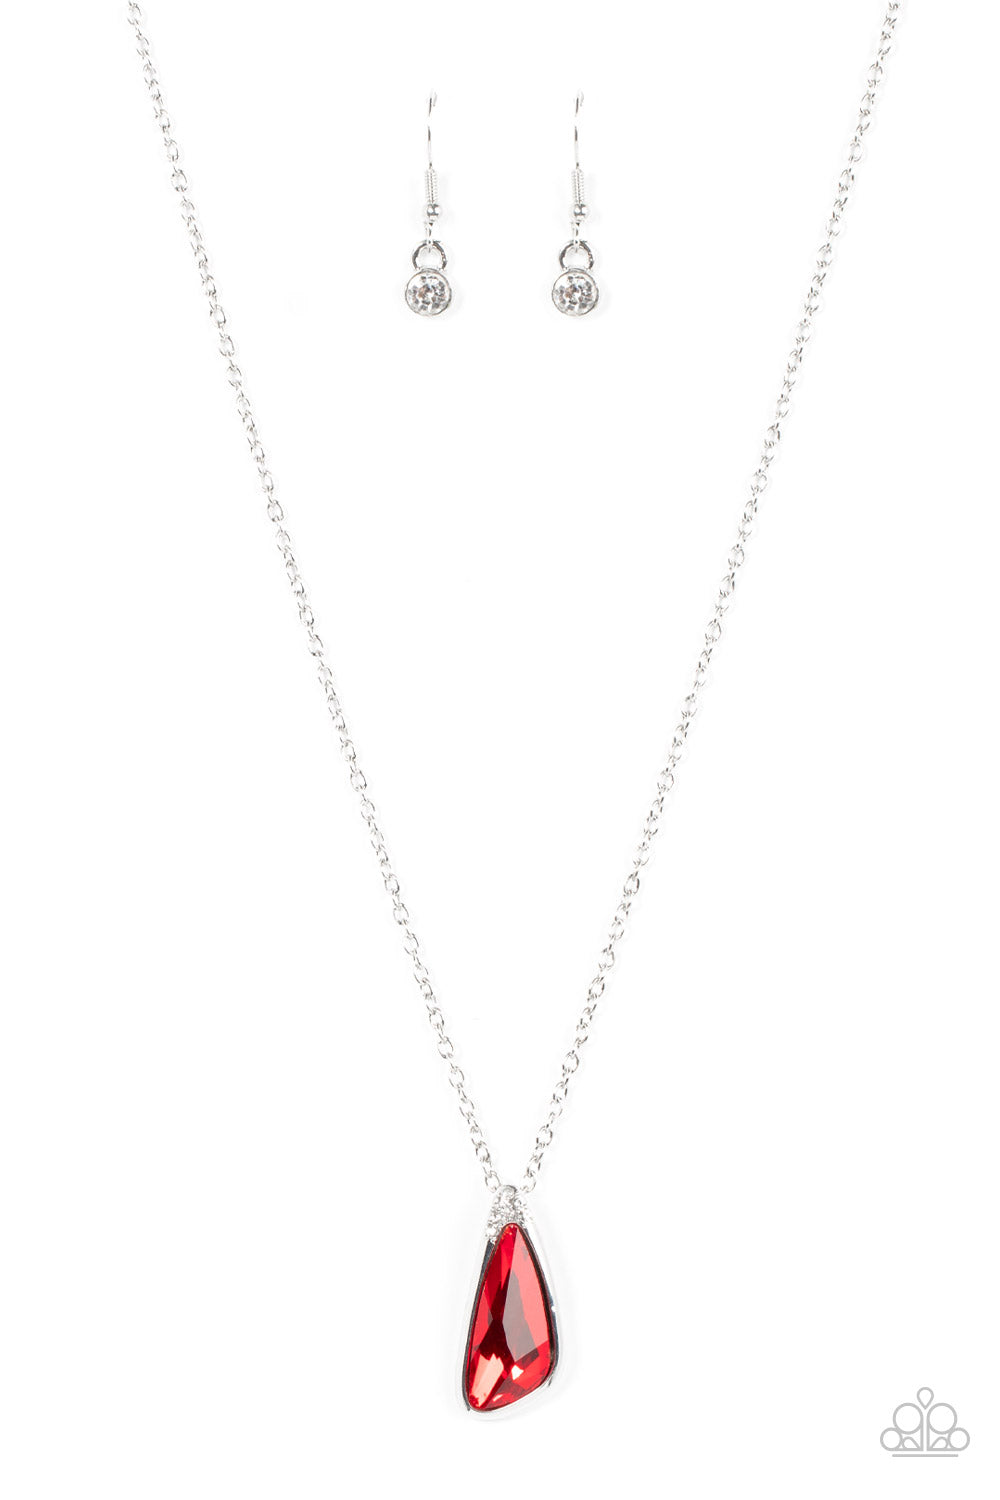 Paparazzi Envious Extravagance - Red Necklace - A Finishing Touch Jewelry